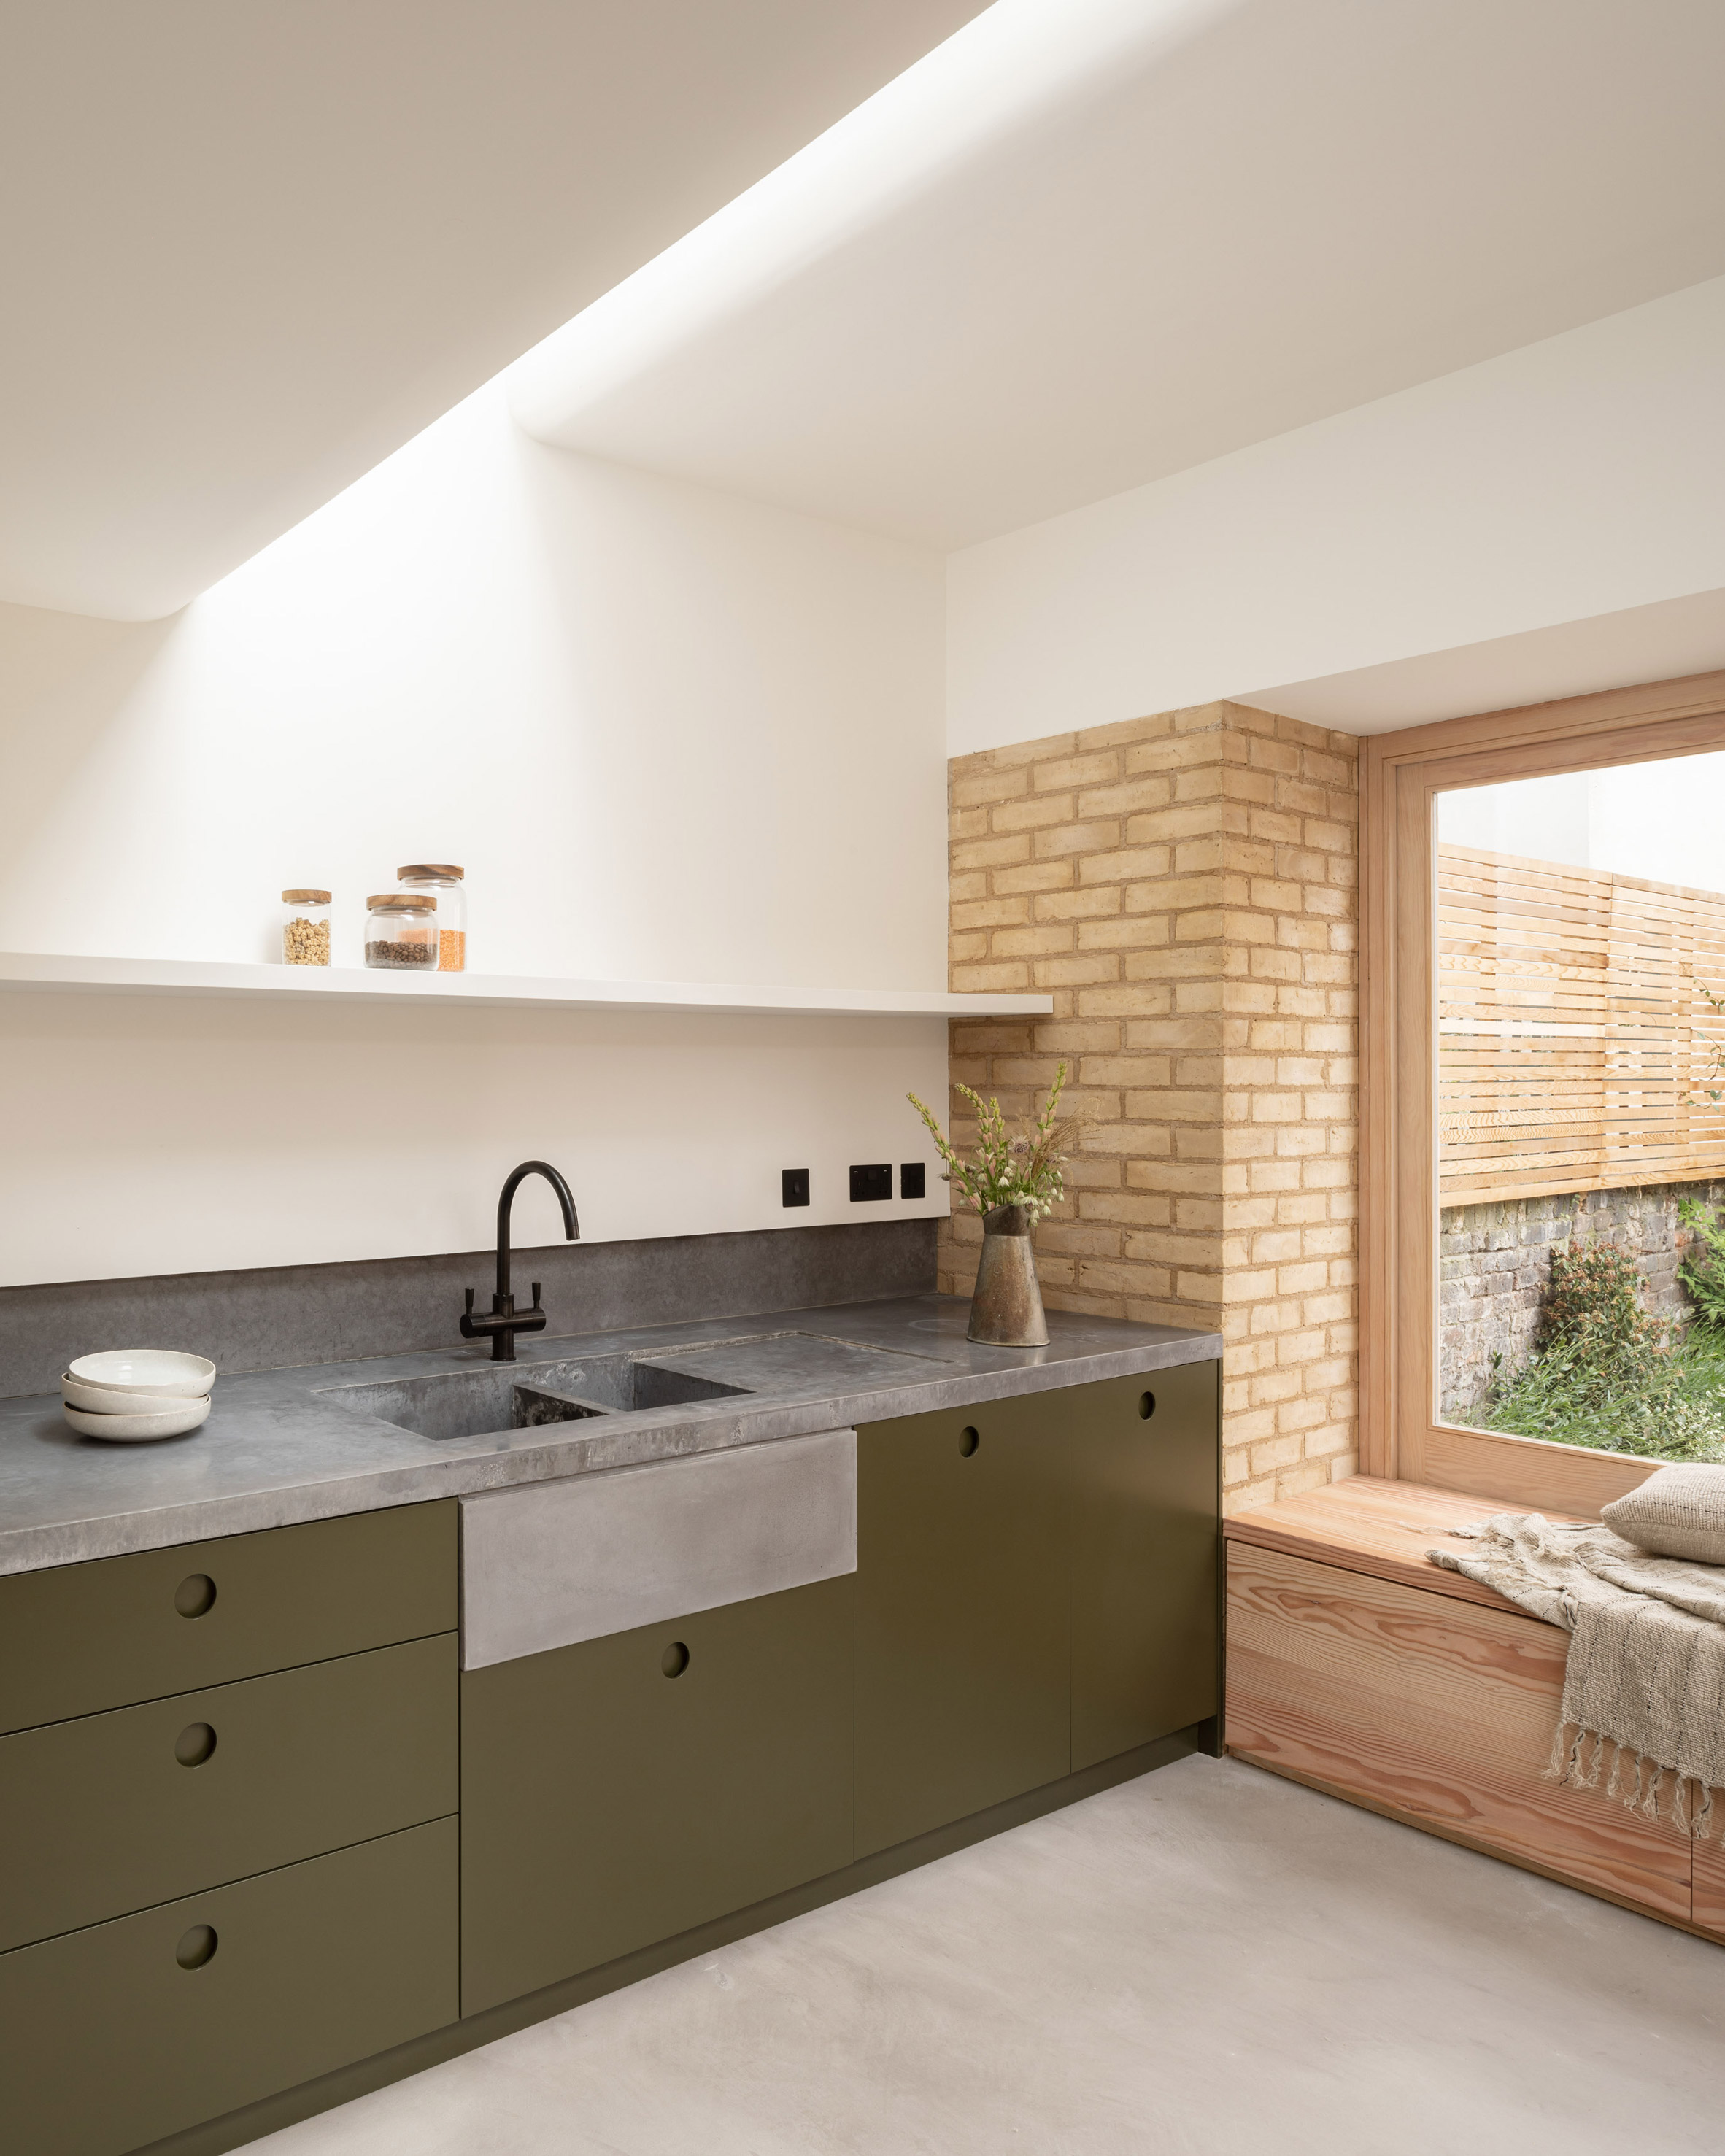 Vestry Road house extension by Oliver Leech Architects new kitchen